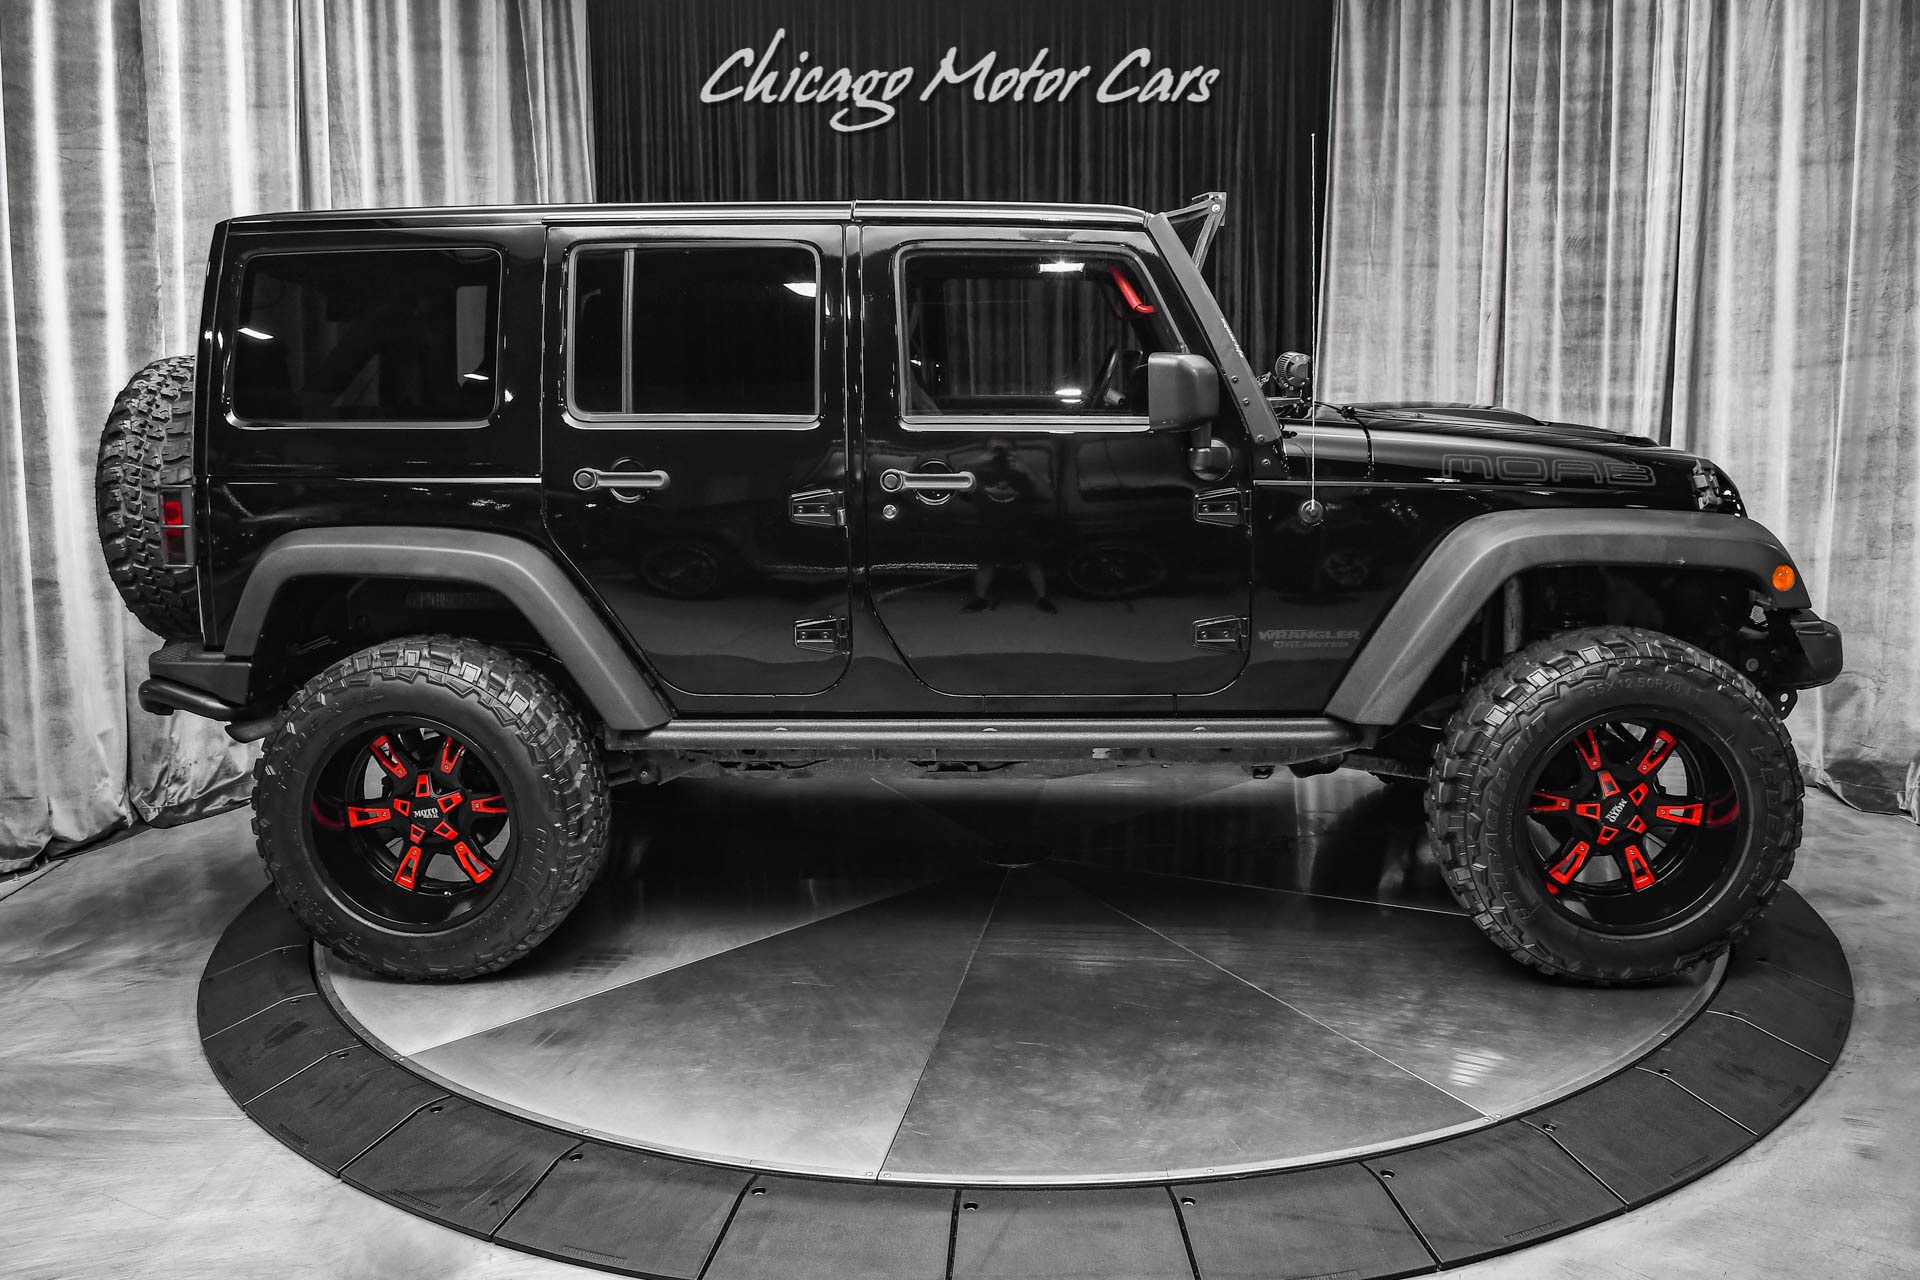 Used 2013 Jeep Wrangler Unlimited Sahara Moab! 4 inch! Lift 35in Tires ... 2013 Jeep Wrangler Black Interior